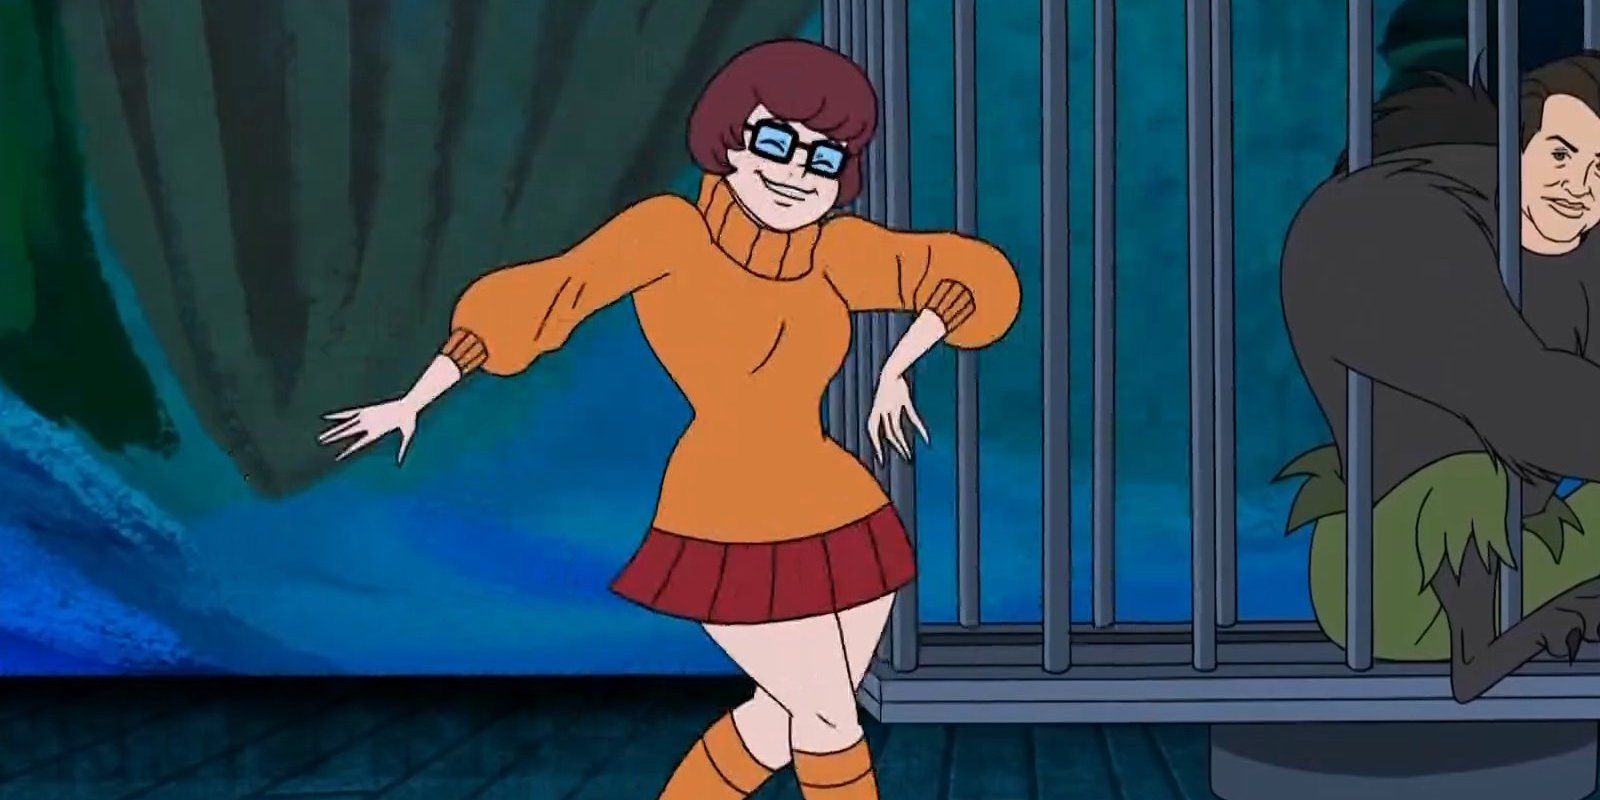 Google Celebrates Velma's Coming Out In New Scooby-Doo Movie